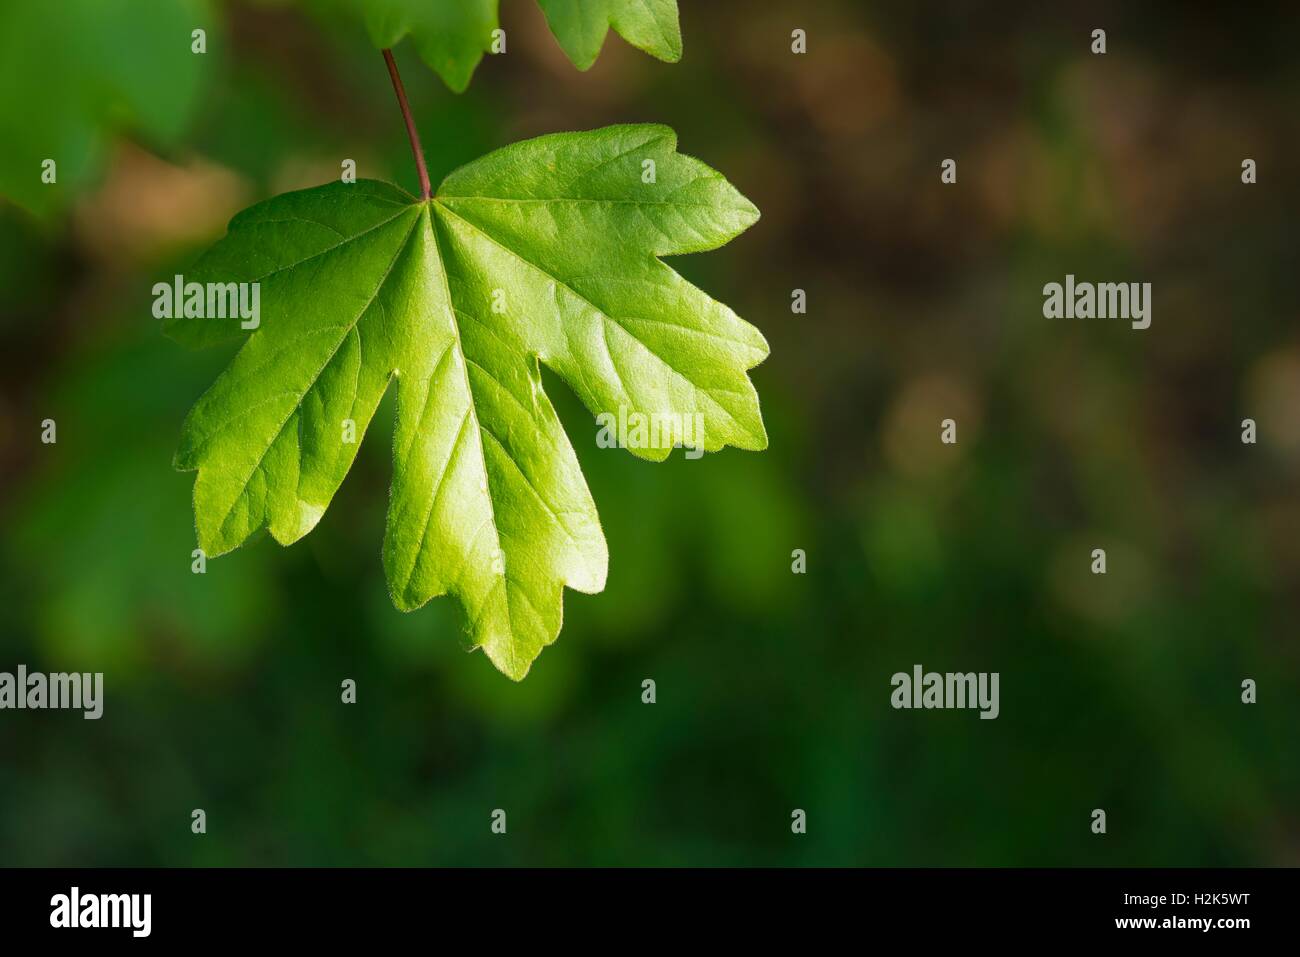 Young leaf from the field maple (Acer campestre), Lower Saxony, Germany Stock Photo